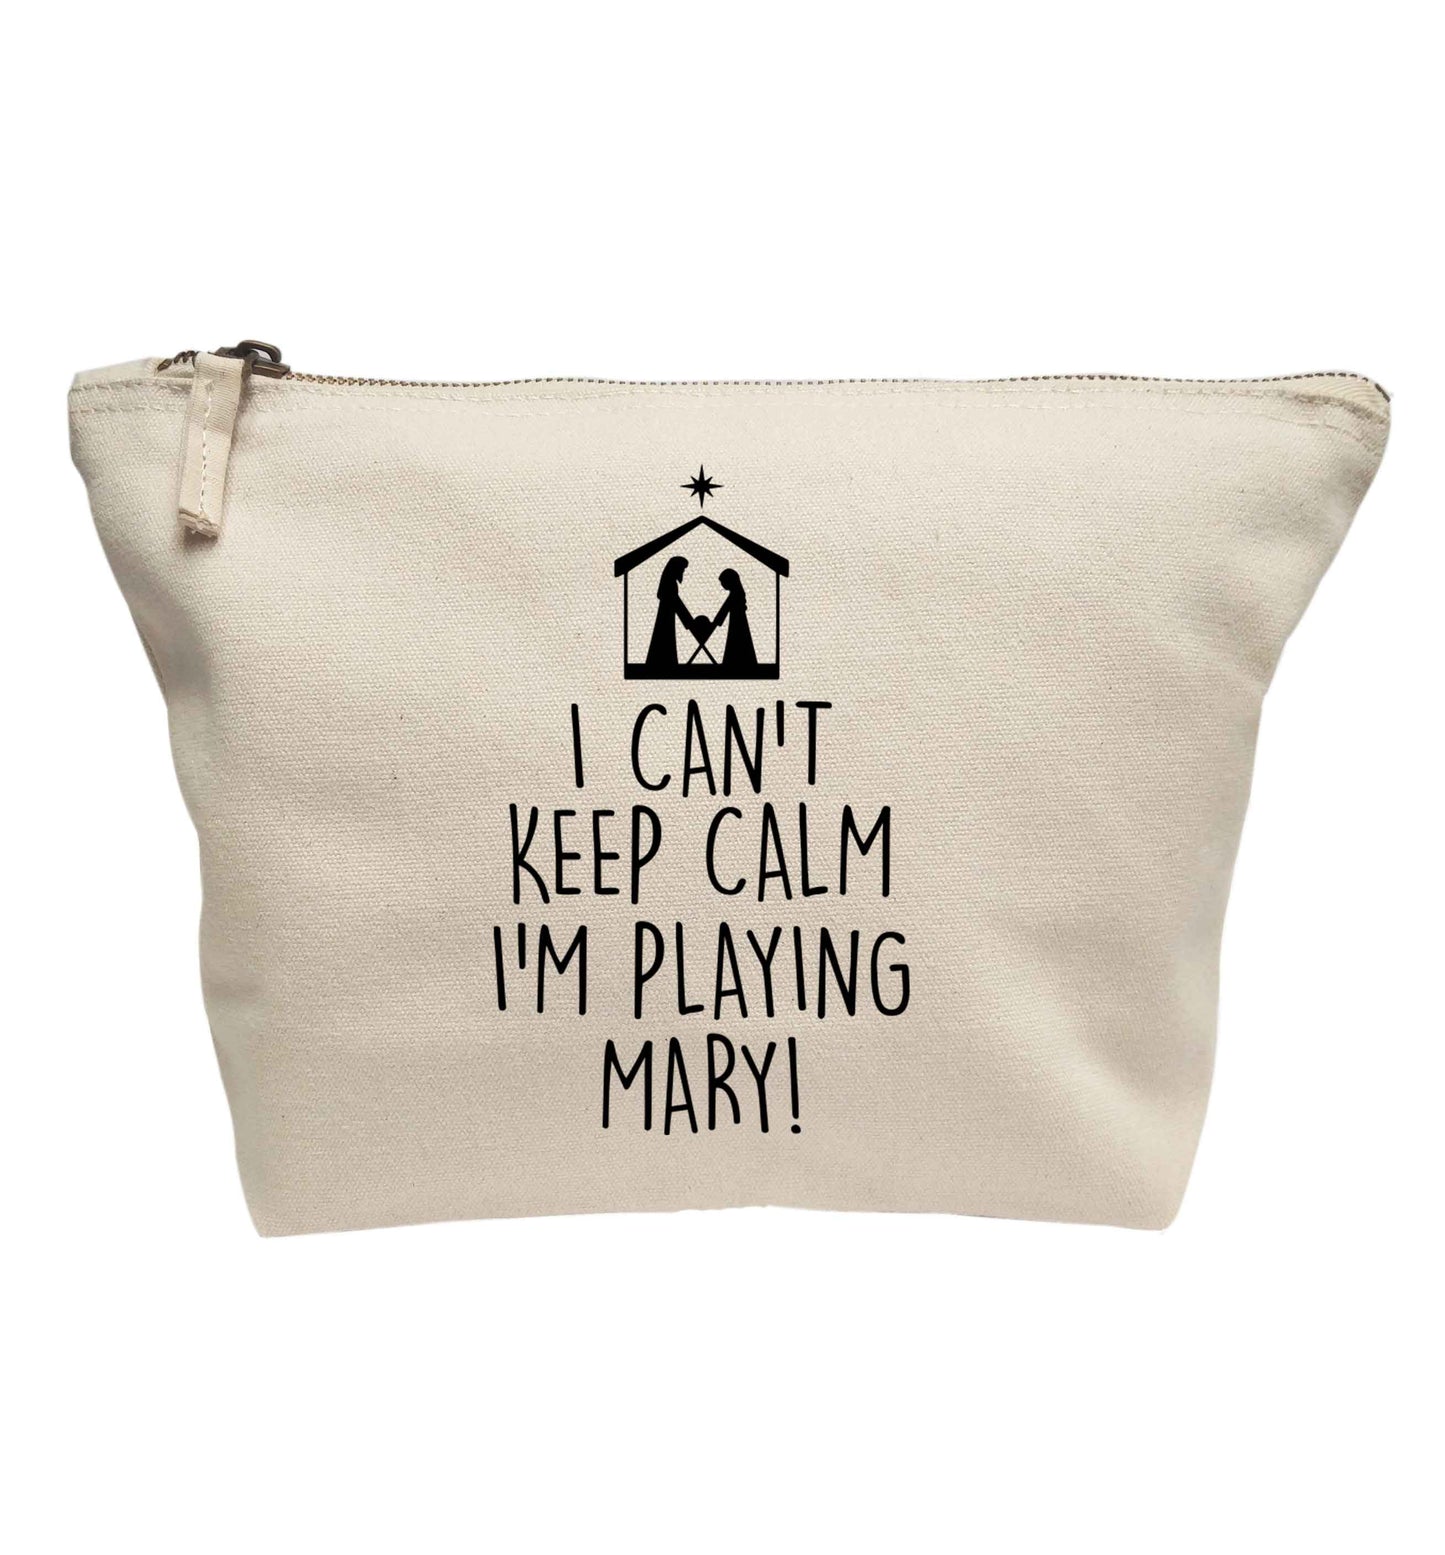 I can't keep calm I'm playing Mary | makeup / wash bag